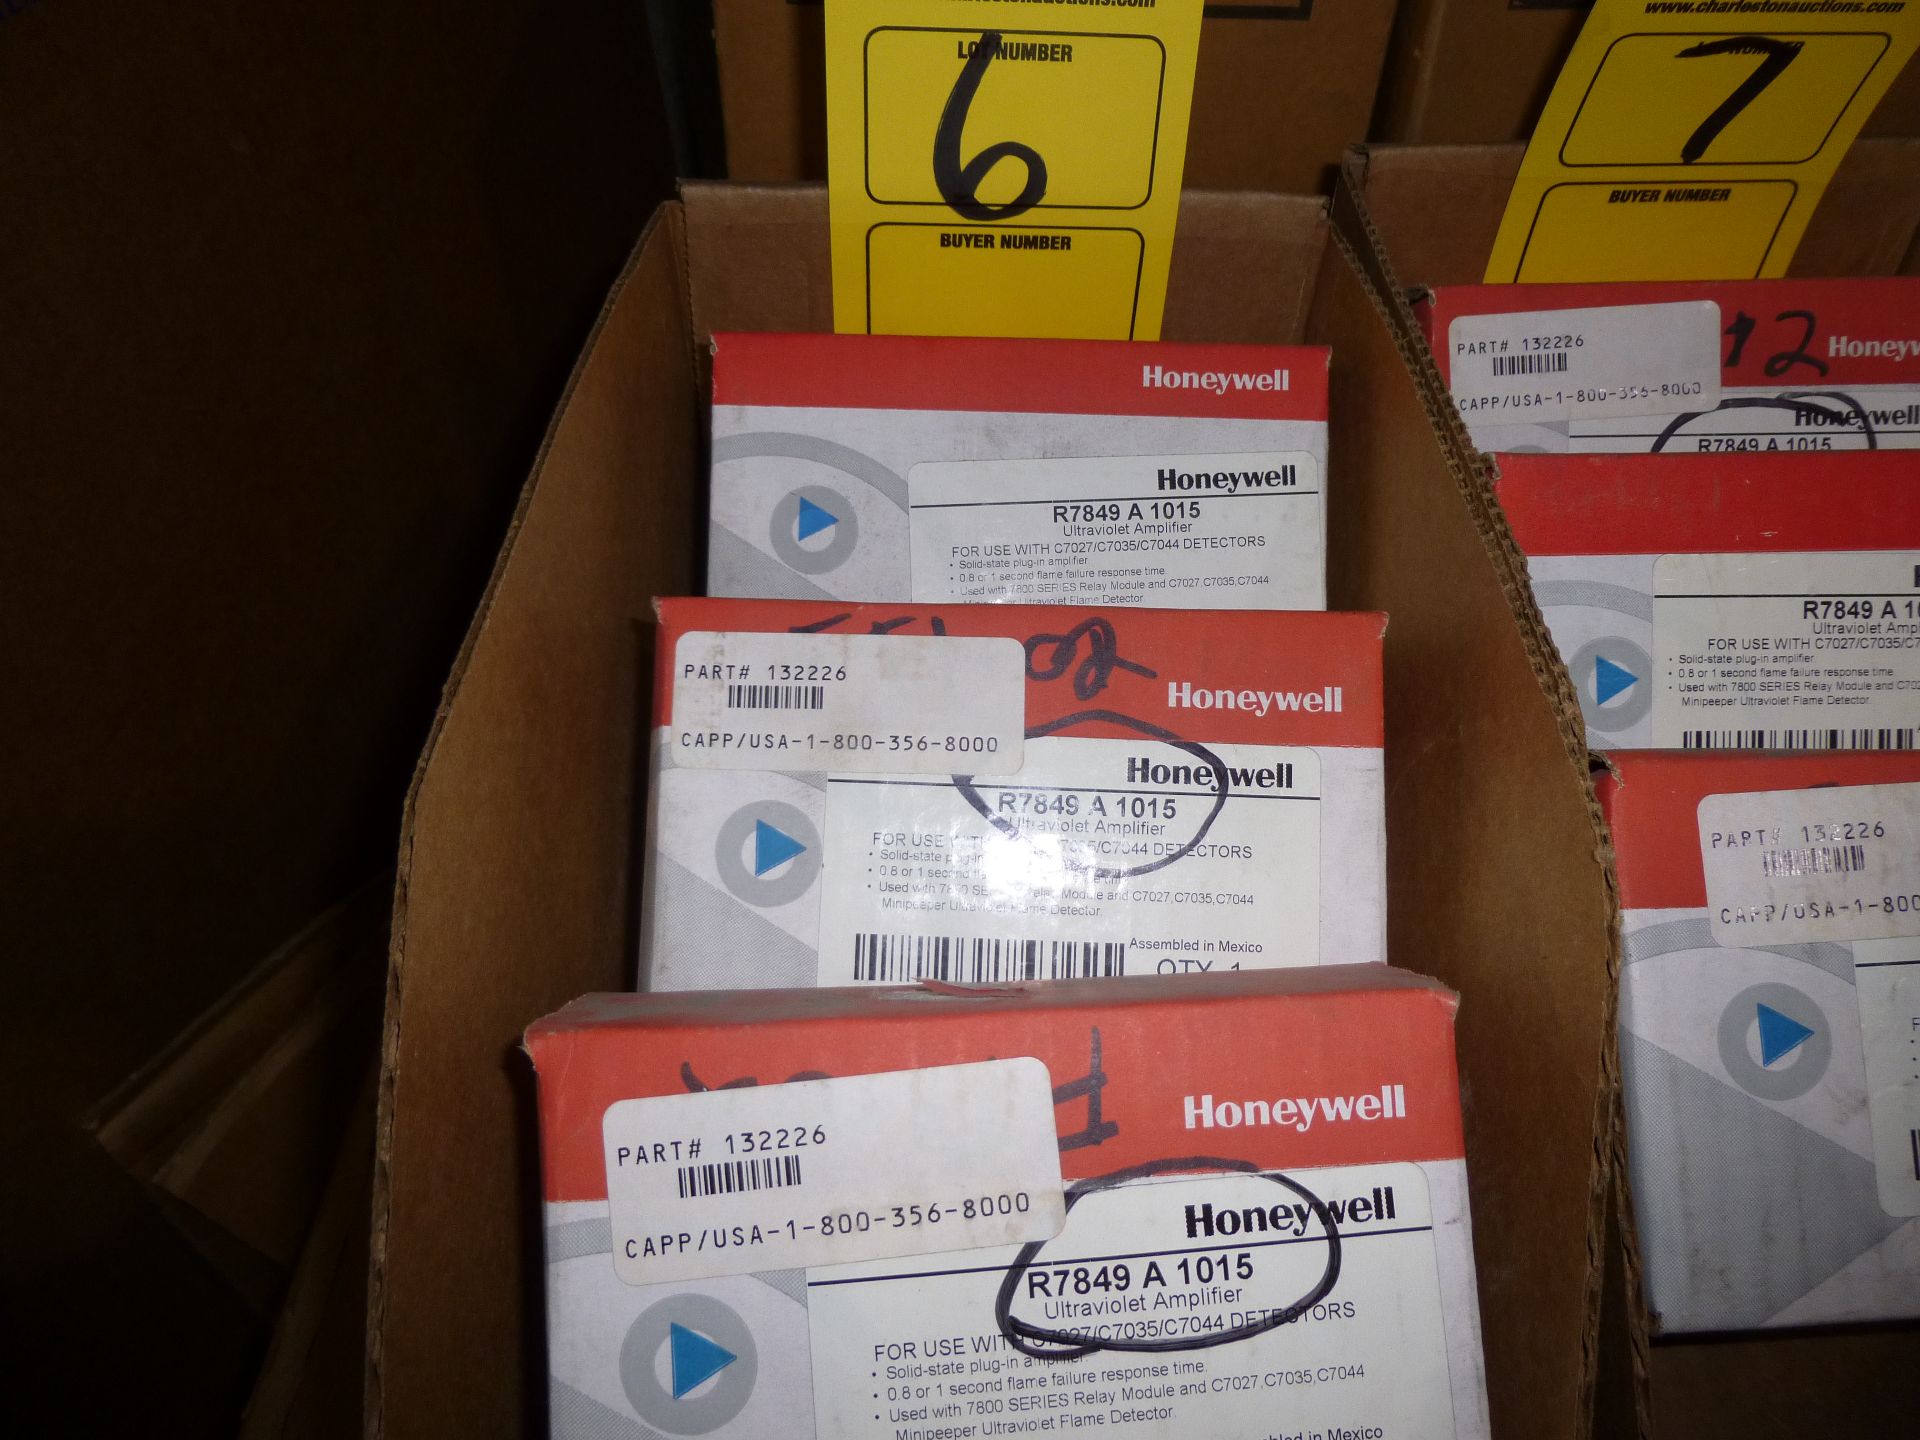 Qty 3 Honeywell R7849-A-1015 ultraviolet amplifier new, as always with Brolyn LLC auctions, all lots